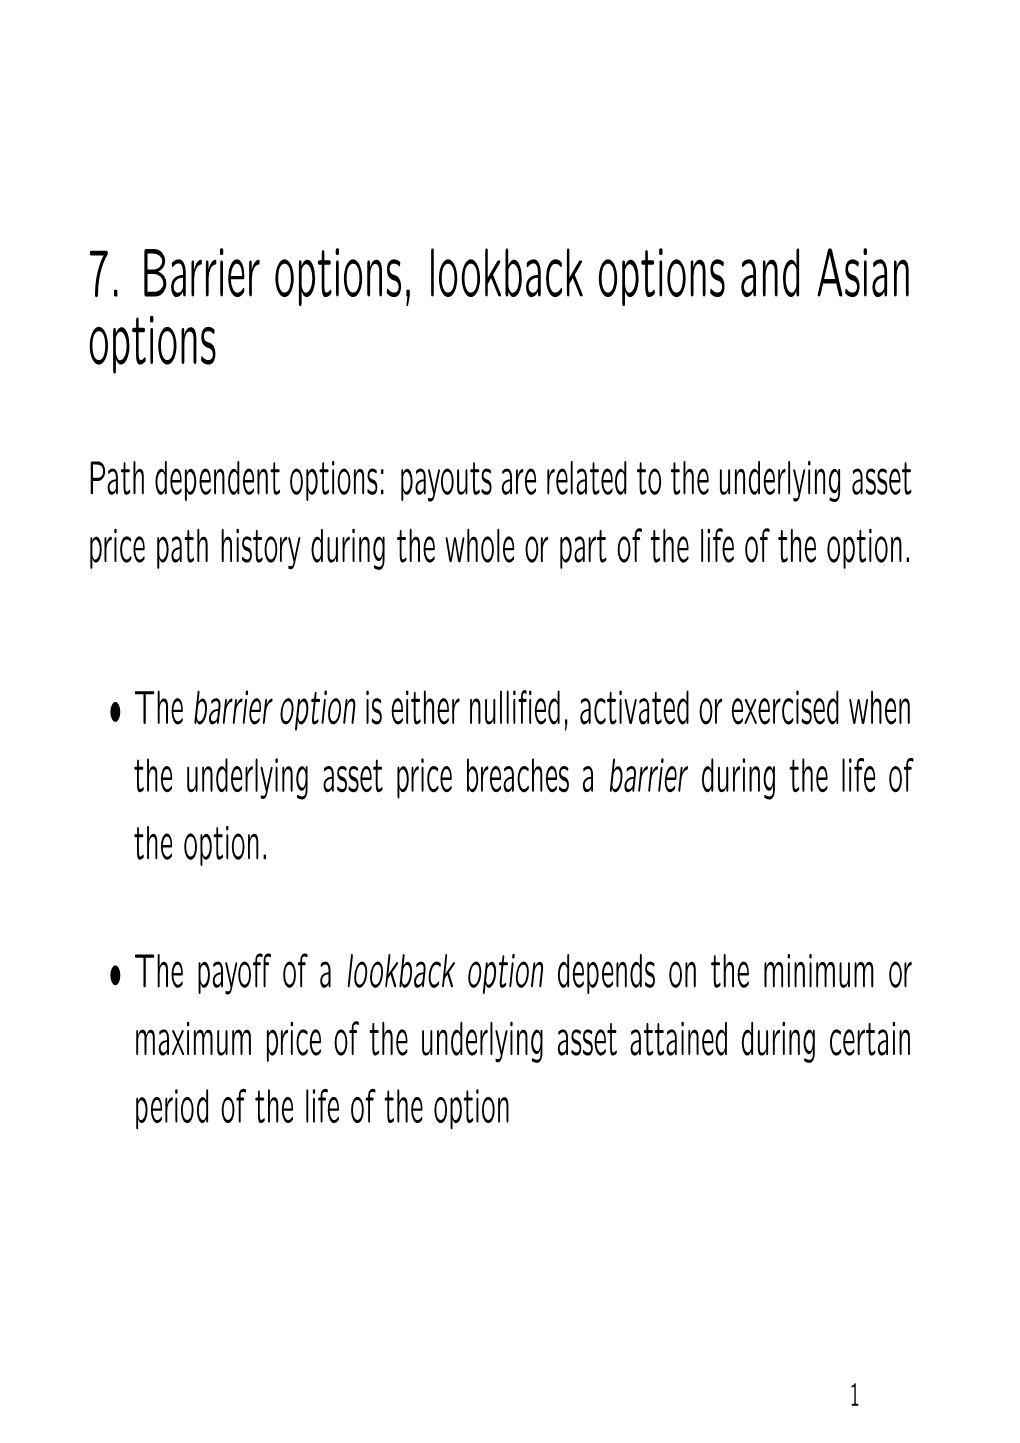 7. Barrier Options, Lookback Options and Asian Options